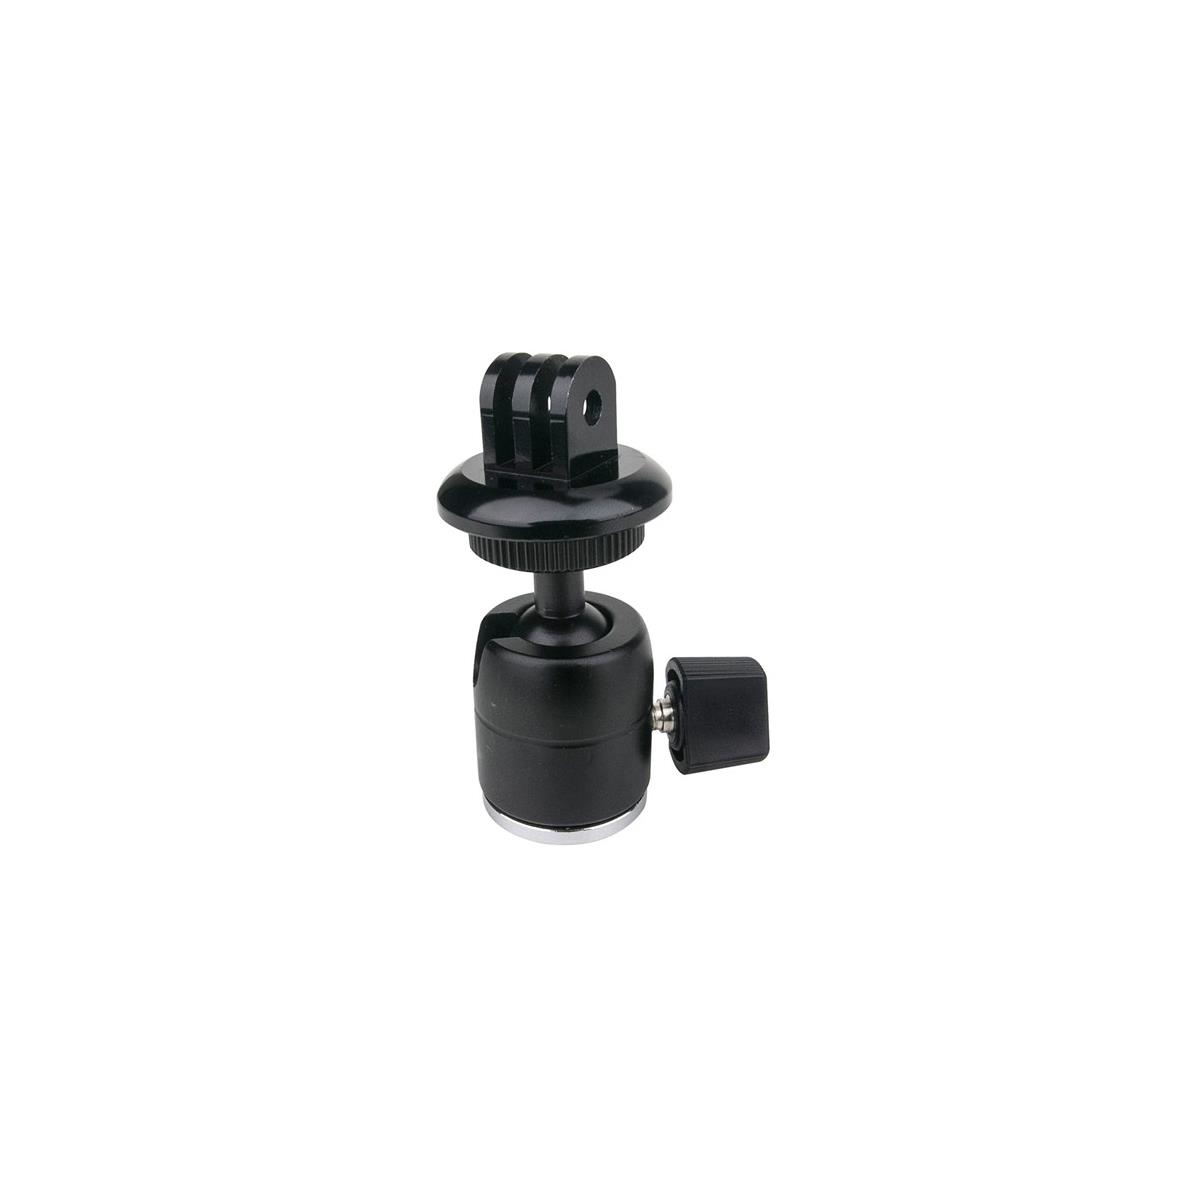 Photos - Action Camera Mount Kupo GoPro Tripod Mount with Ball Head Adapter KG015011 